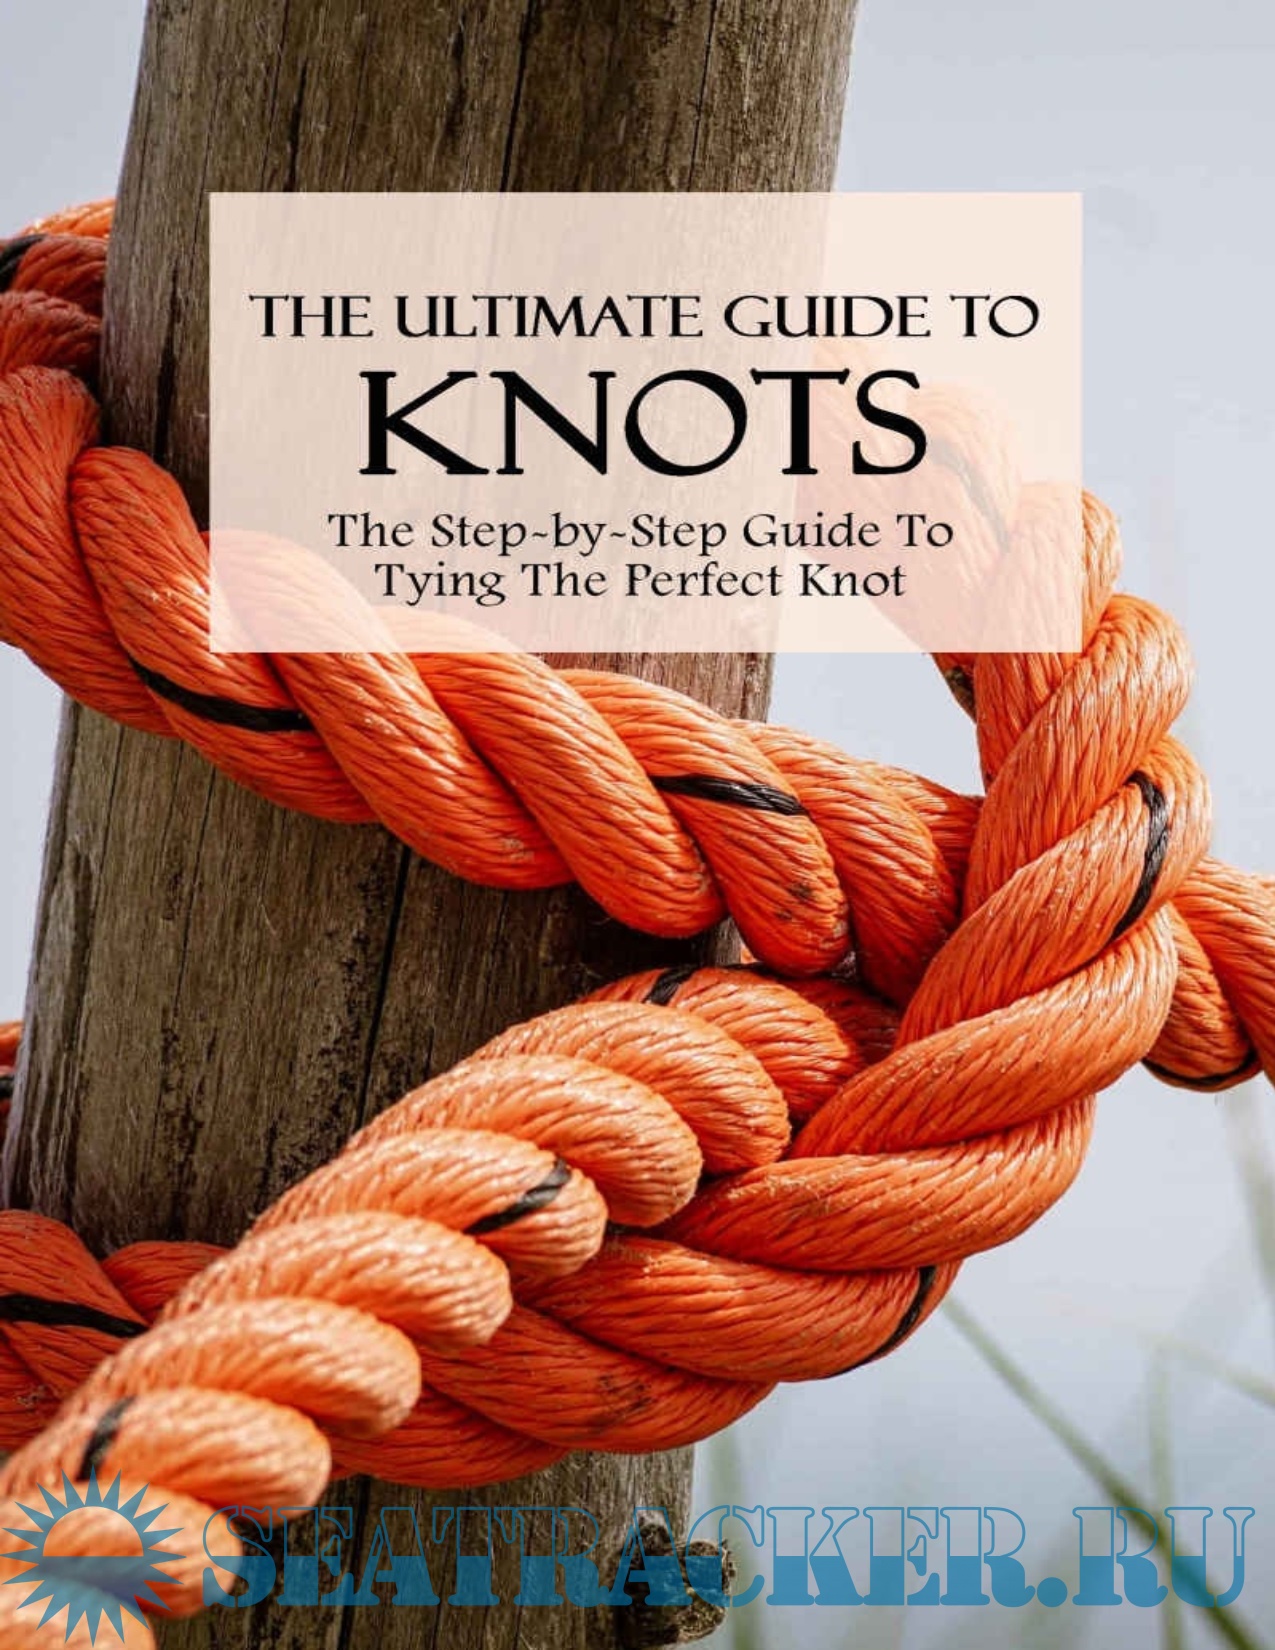 The Ultimate Guide To Knots - The Step-by-Step Guide To Tying The Perfect  Knot - How To Tie Basic Knots - Perkins B. [2021, PDF] › Морской трекер